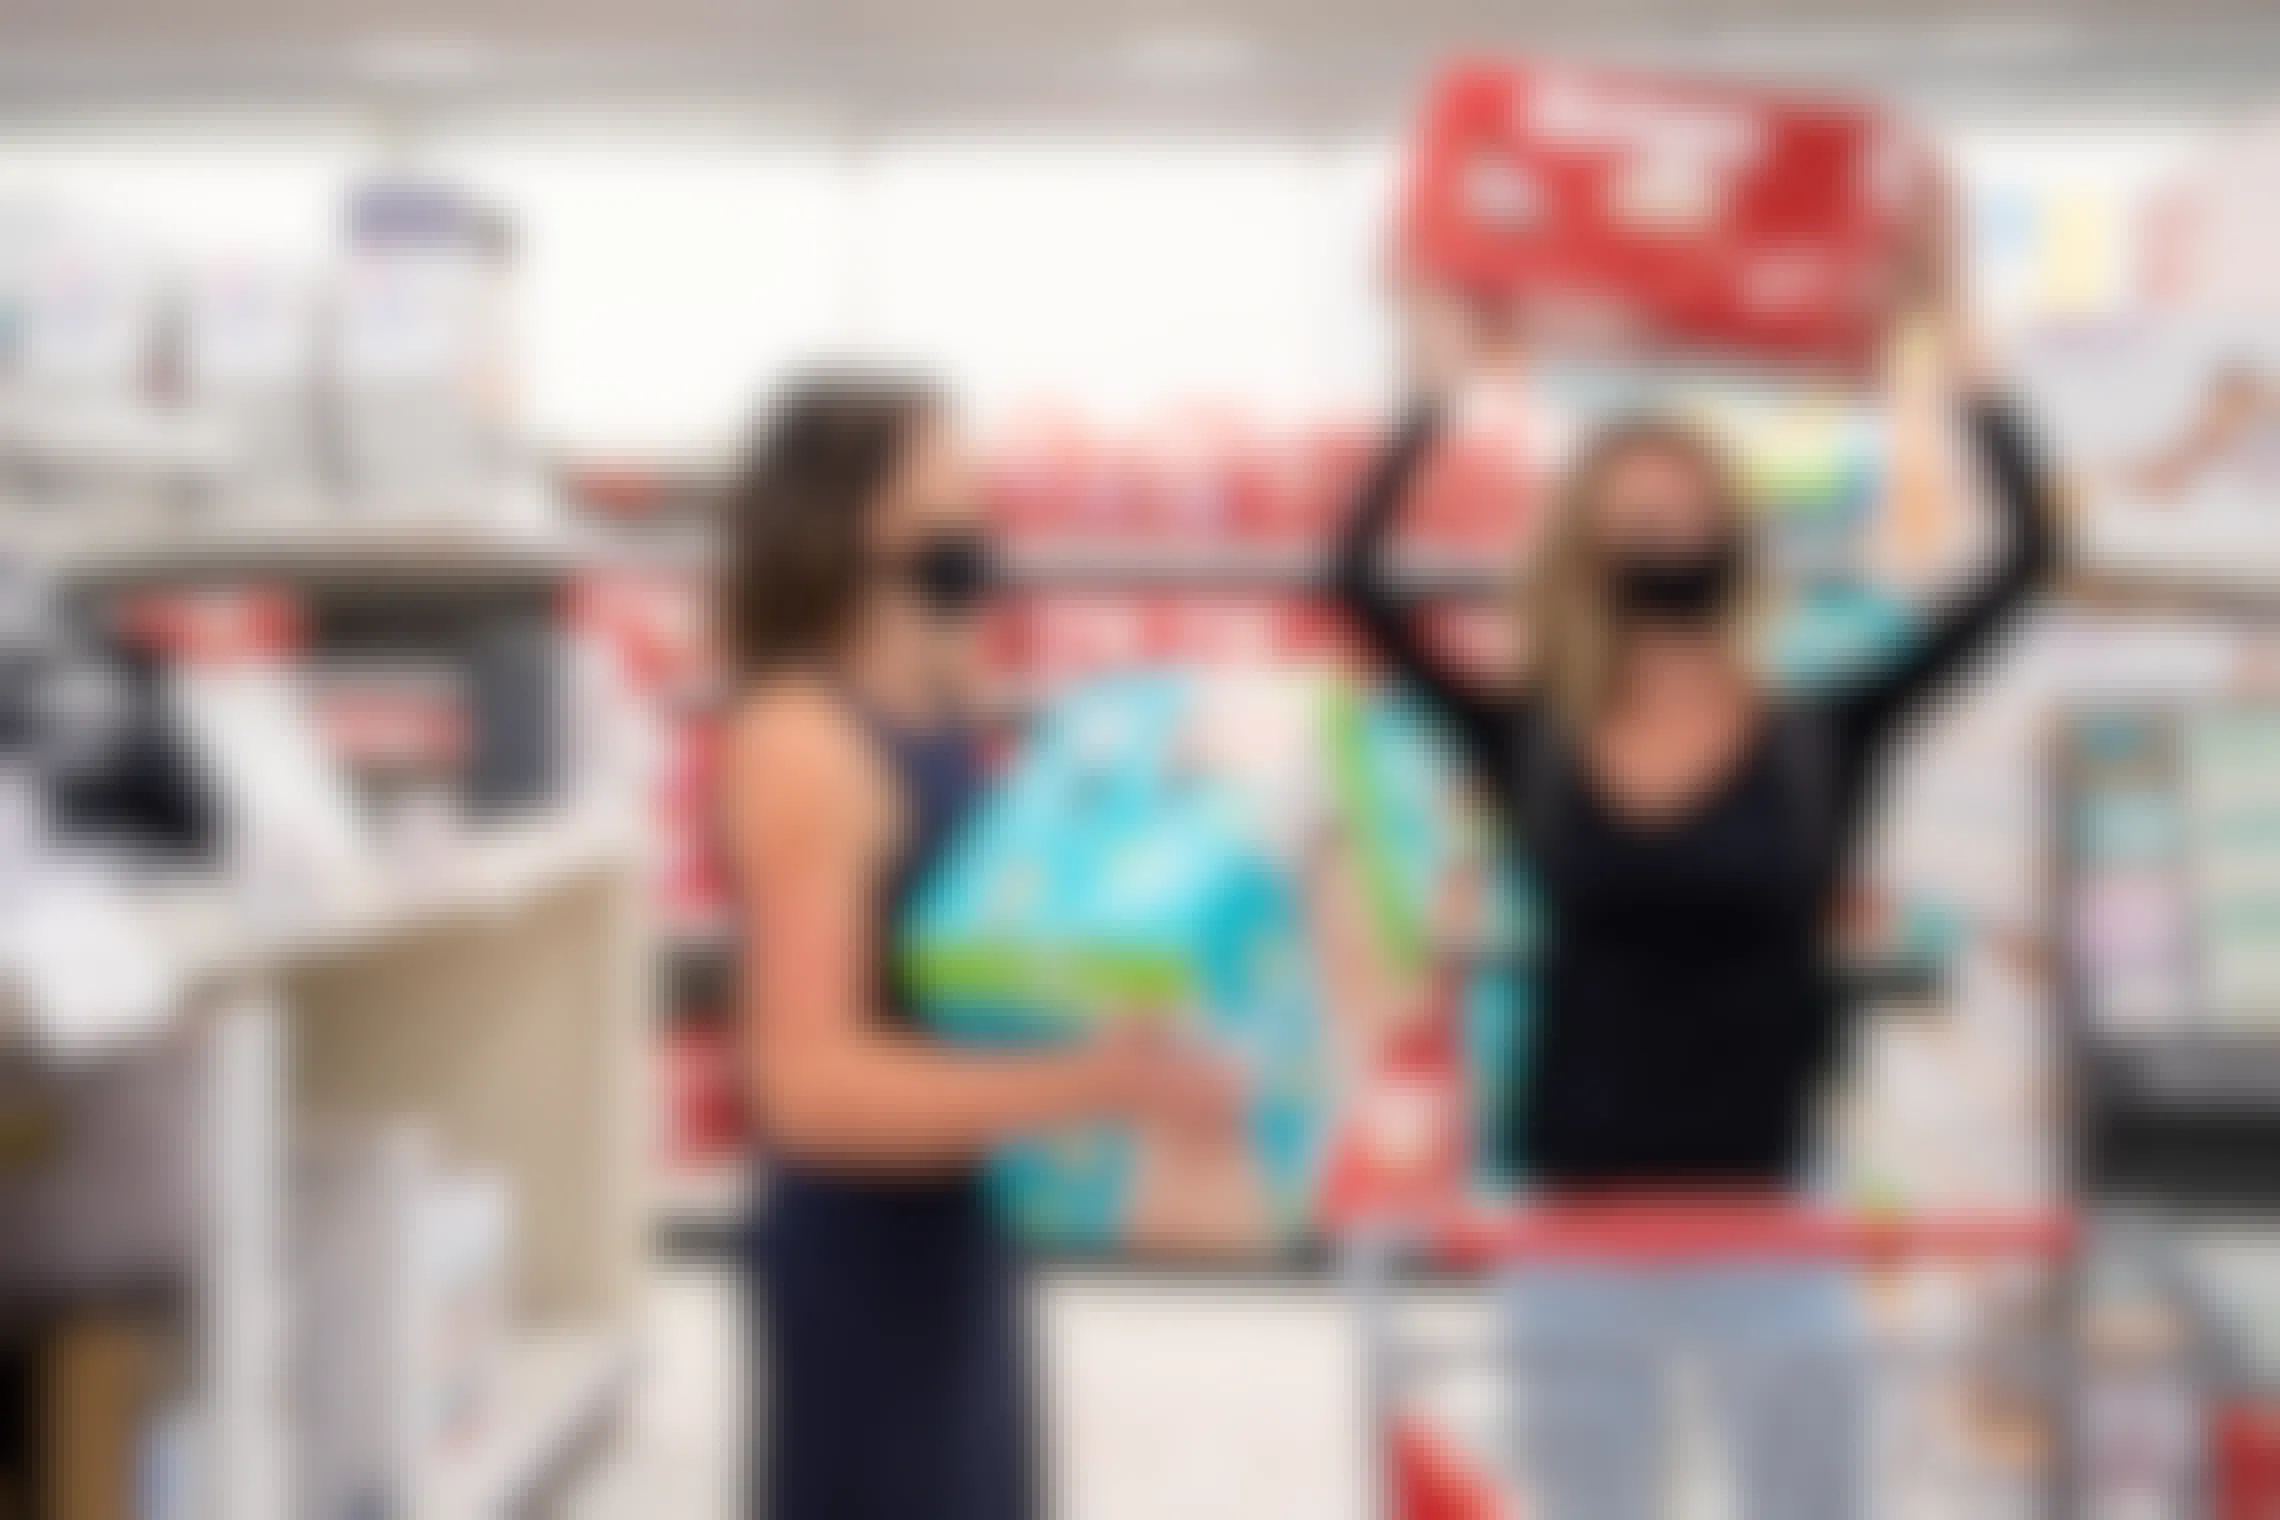 Two women shopping for pampers and Huggies diapers in Target.